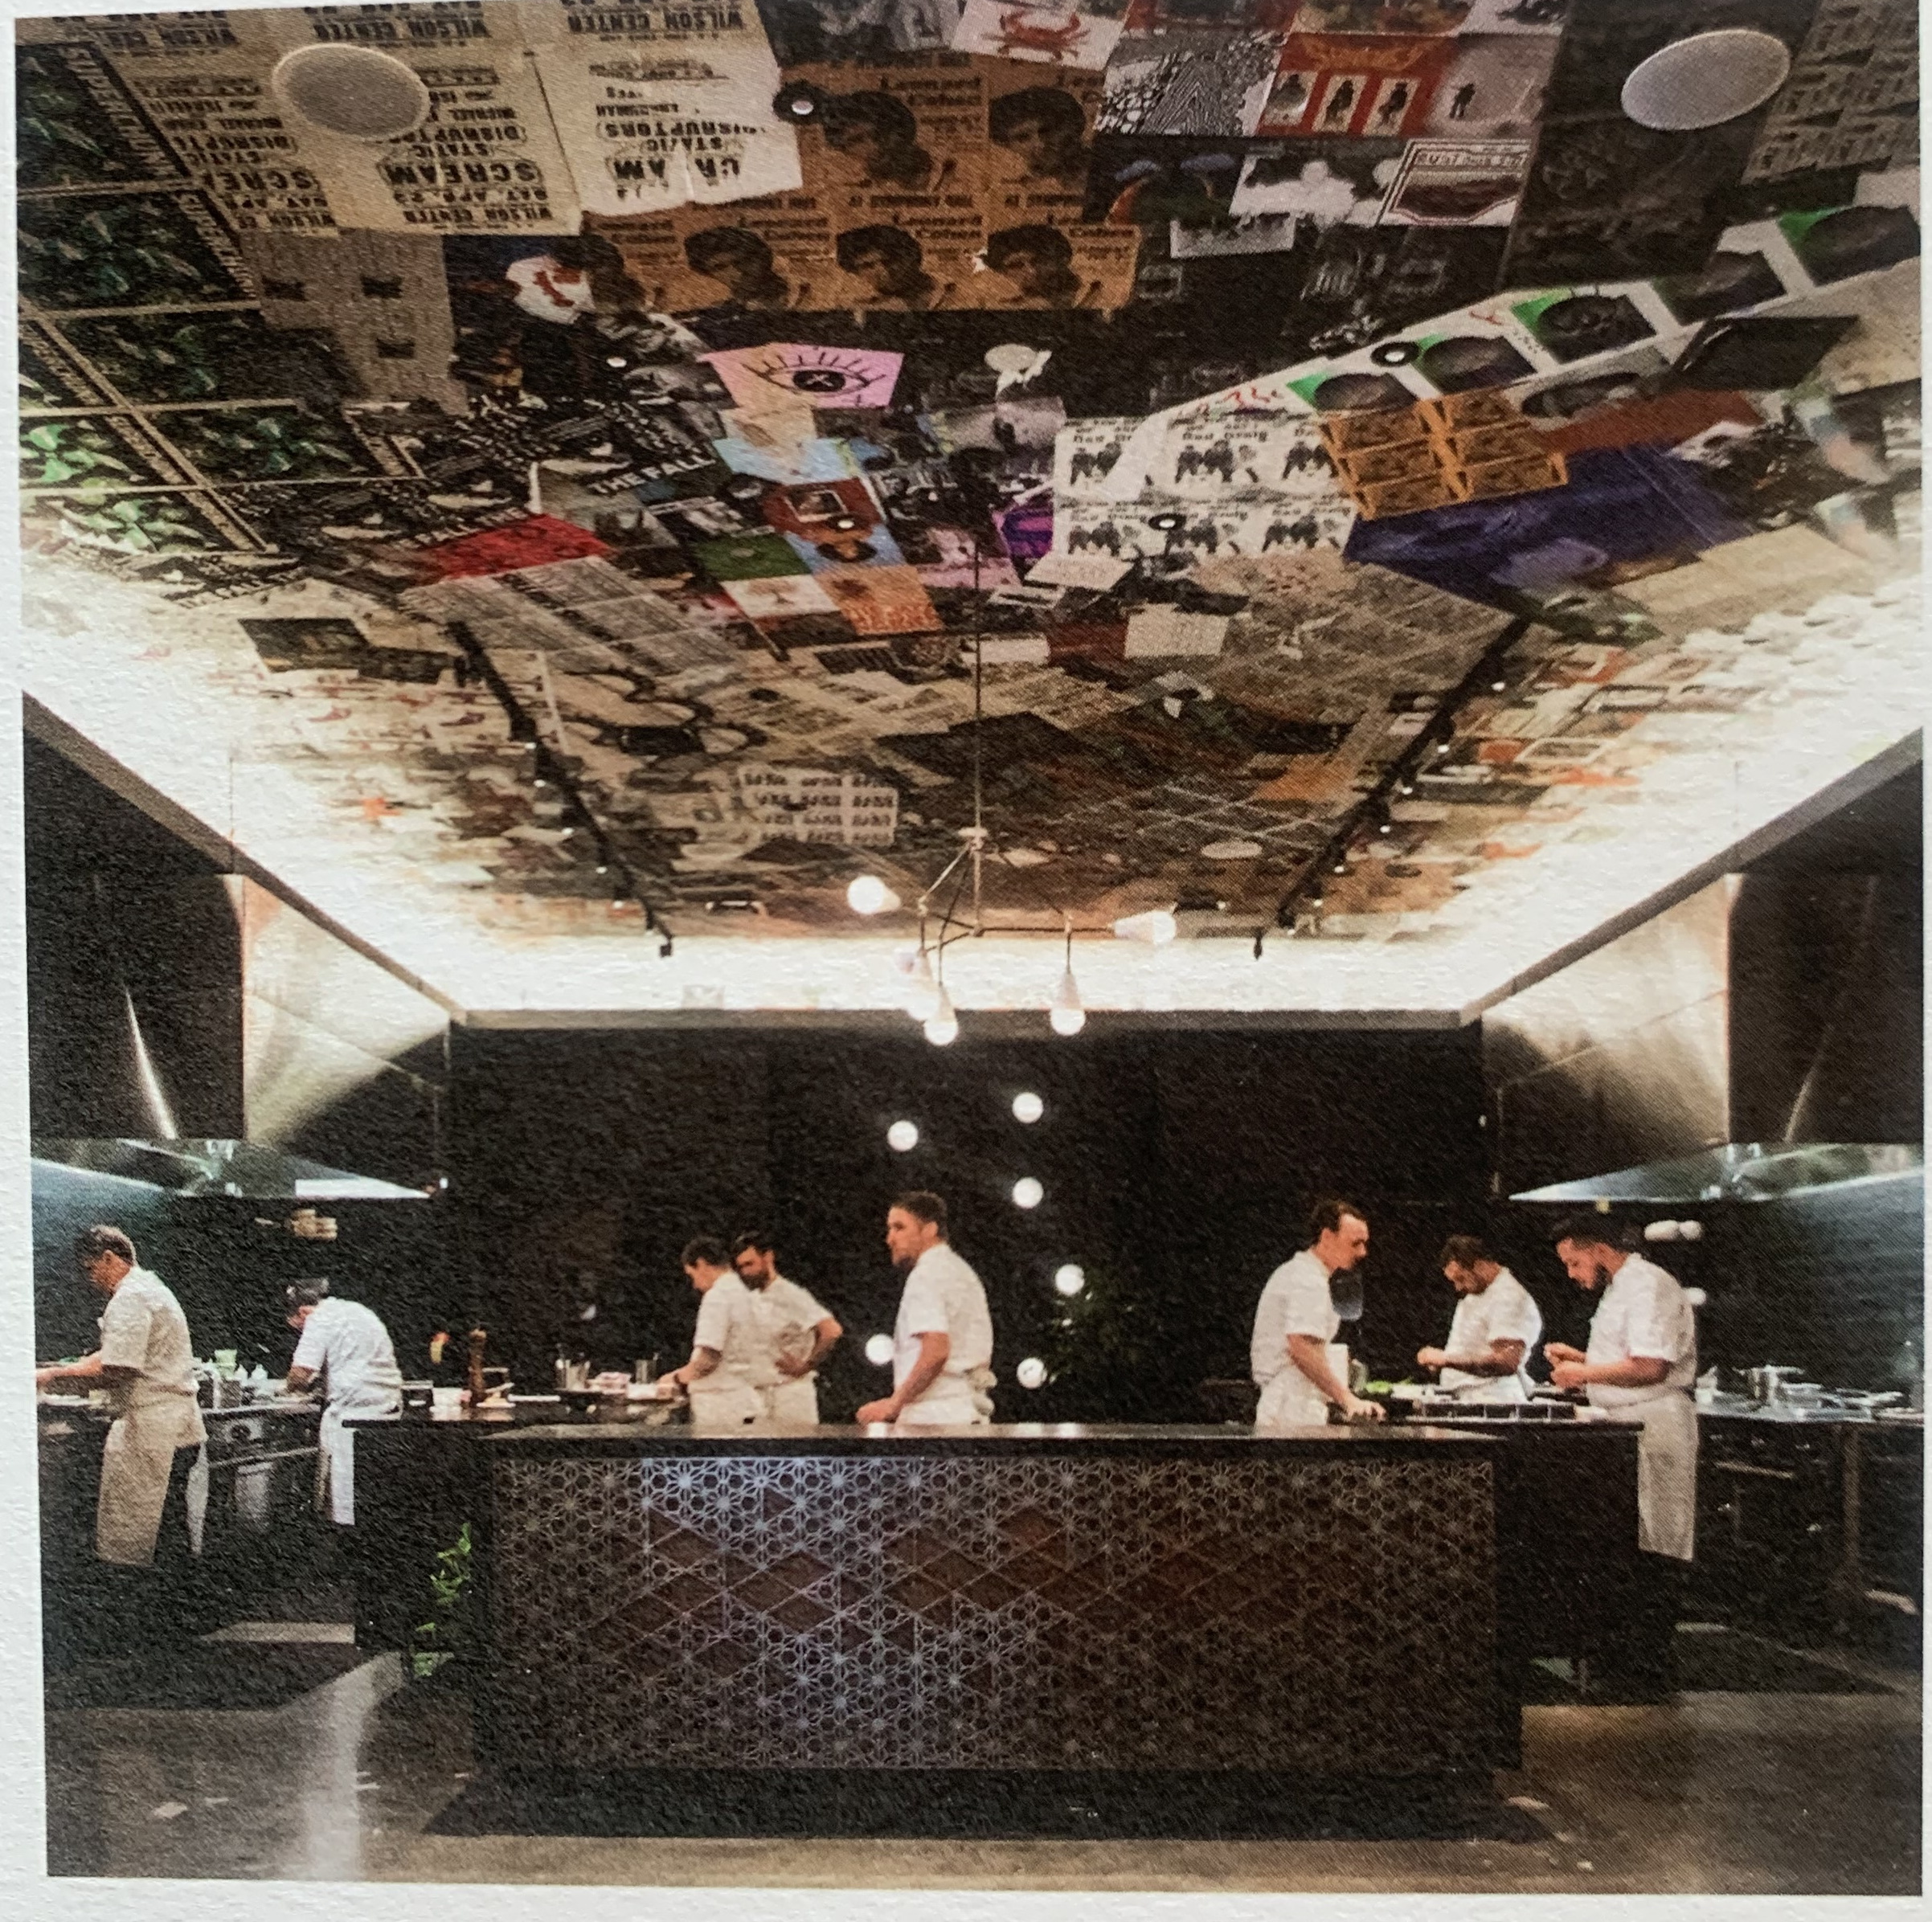 Photo of a printed image of the kitchen. It's an open kitchen, with an island at the front and cooking stations along either wall. The ceiling is well-lit around its perimeter, illuminating a ton of posters for bands & performances that adorn it. The posters are arranged somewhat randomly as a collage, with blocks of the same poster in some spots. Eight chefs in white jackets work diligently in the kitchen.